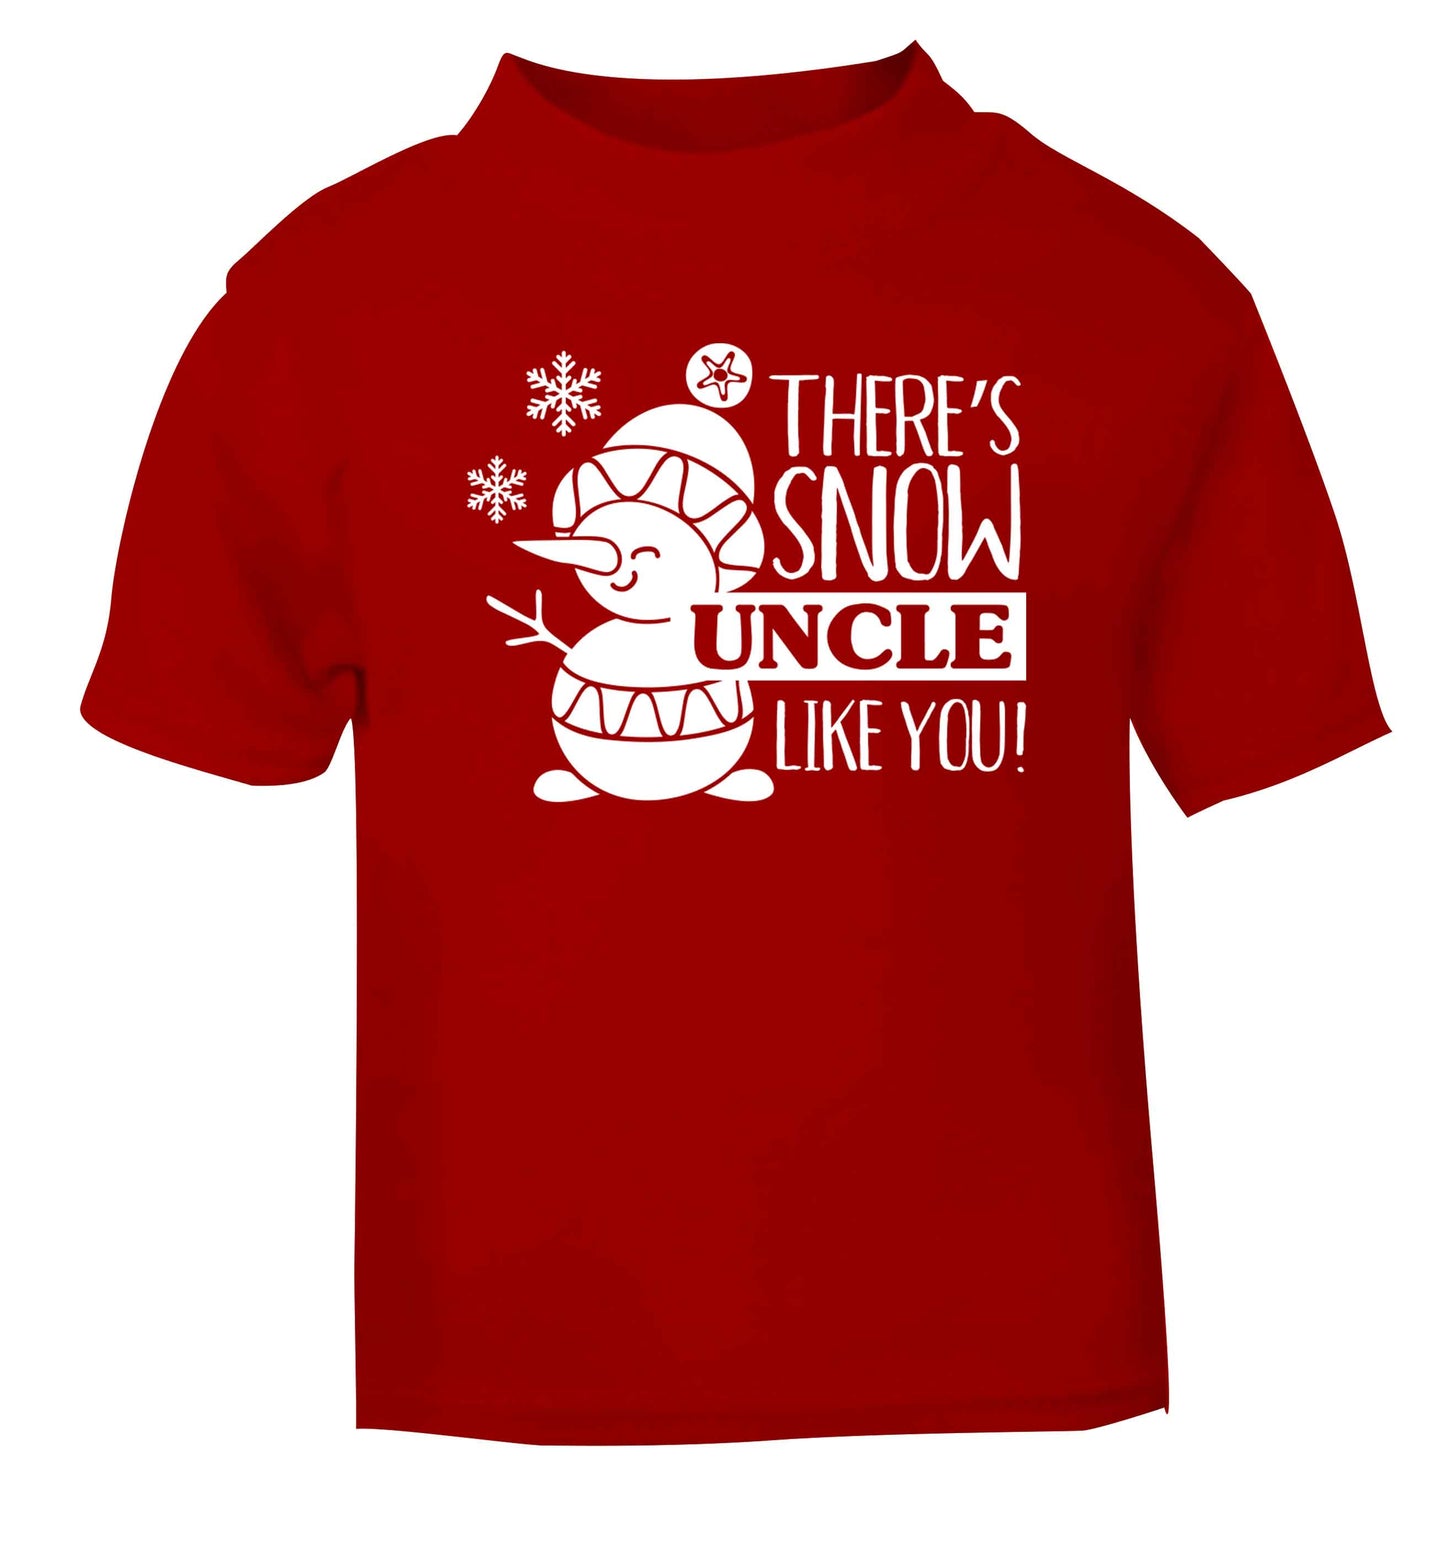 There's snow uncle like you red baby toddler Tshirt 2 Years